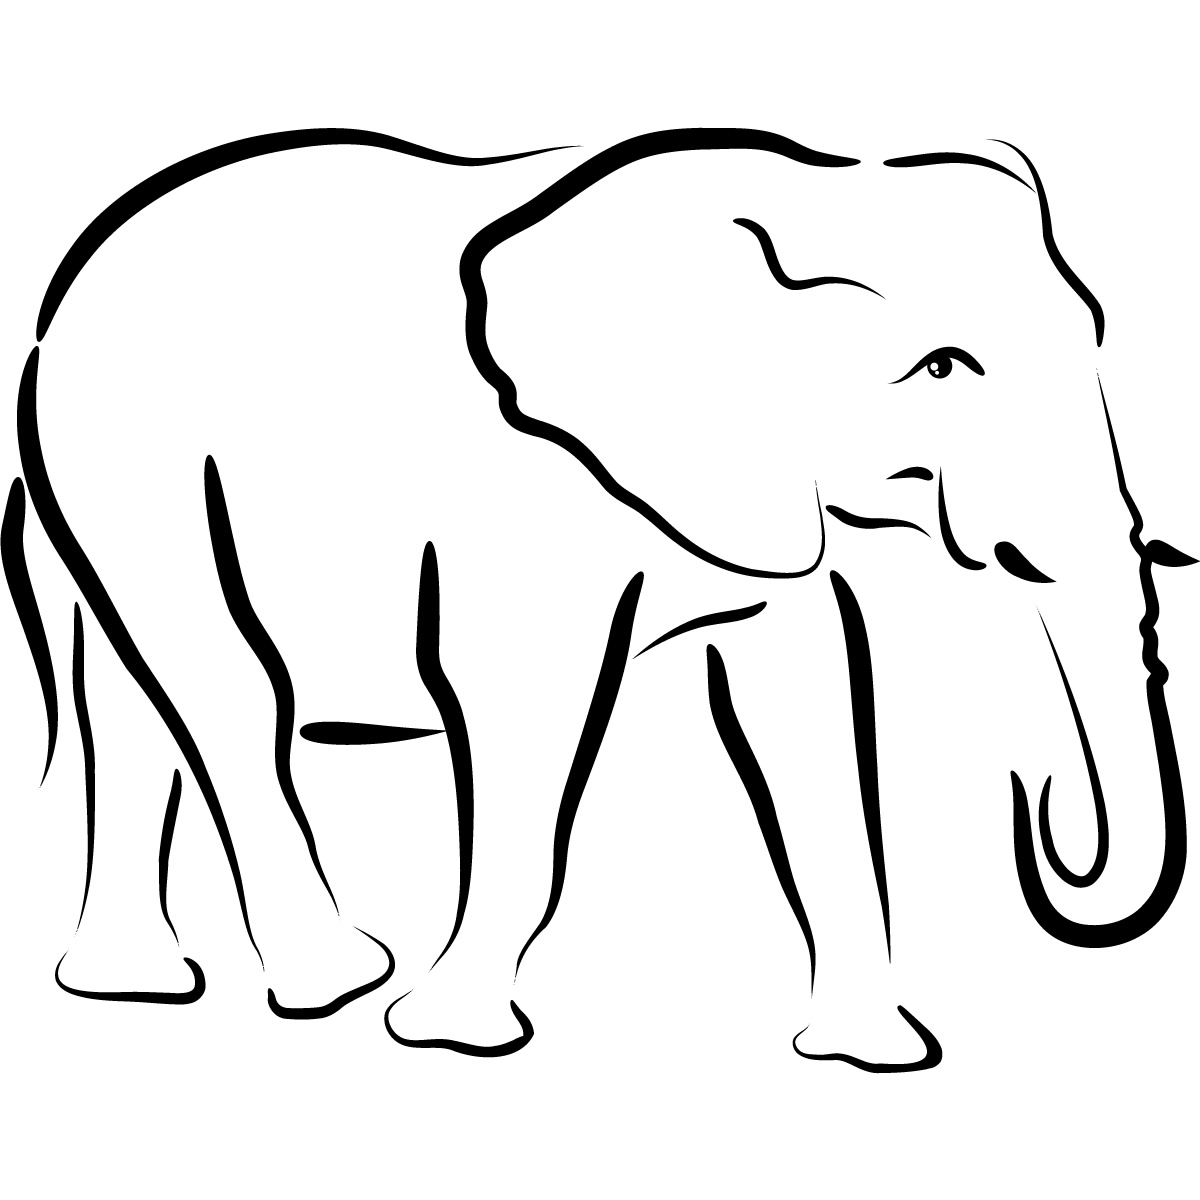 Elephant Drawings Images